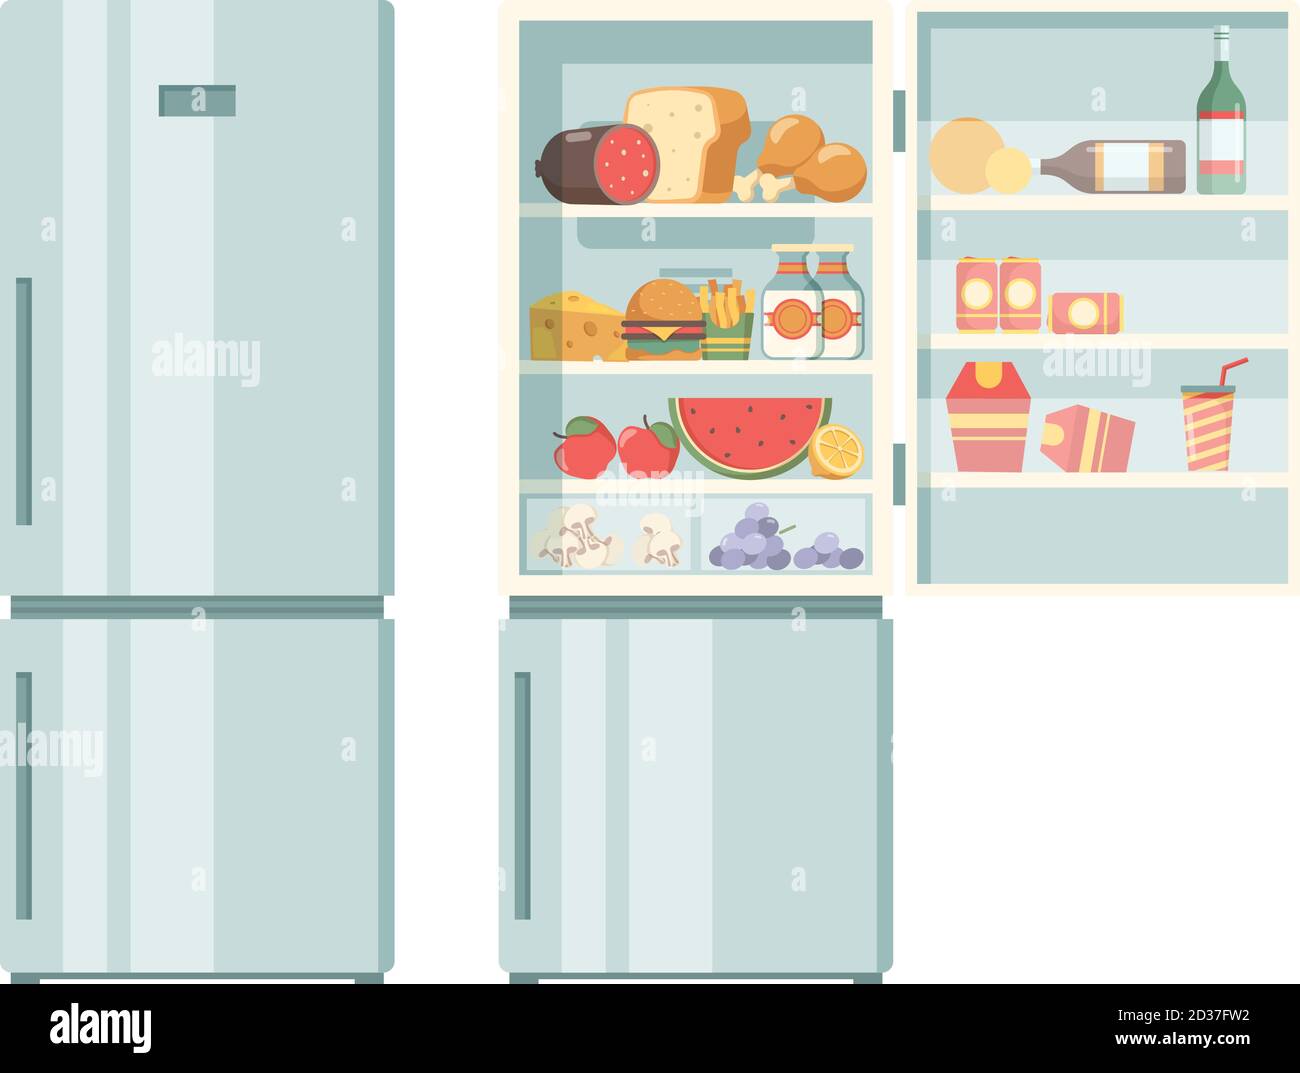 Open refrigerator. Healthy food in frozy refrigerator vegetables meat juce cakes steak supermarket products vector pictures Stock Vector